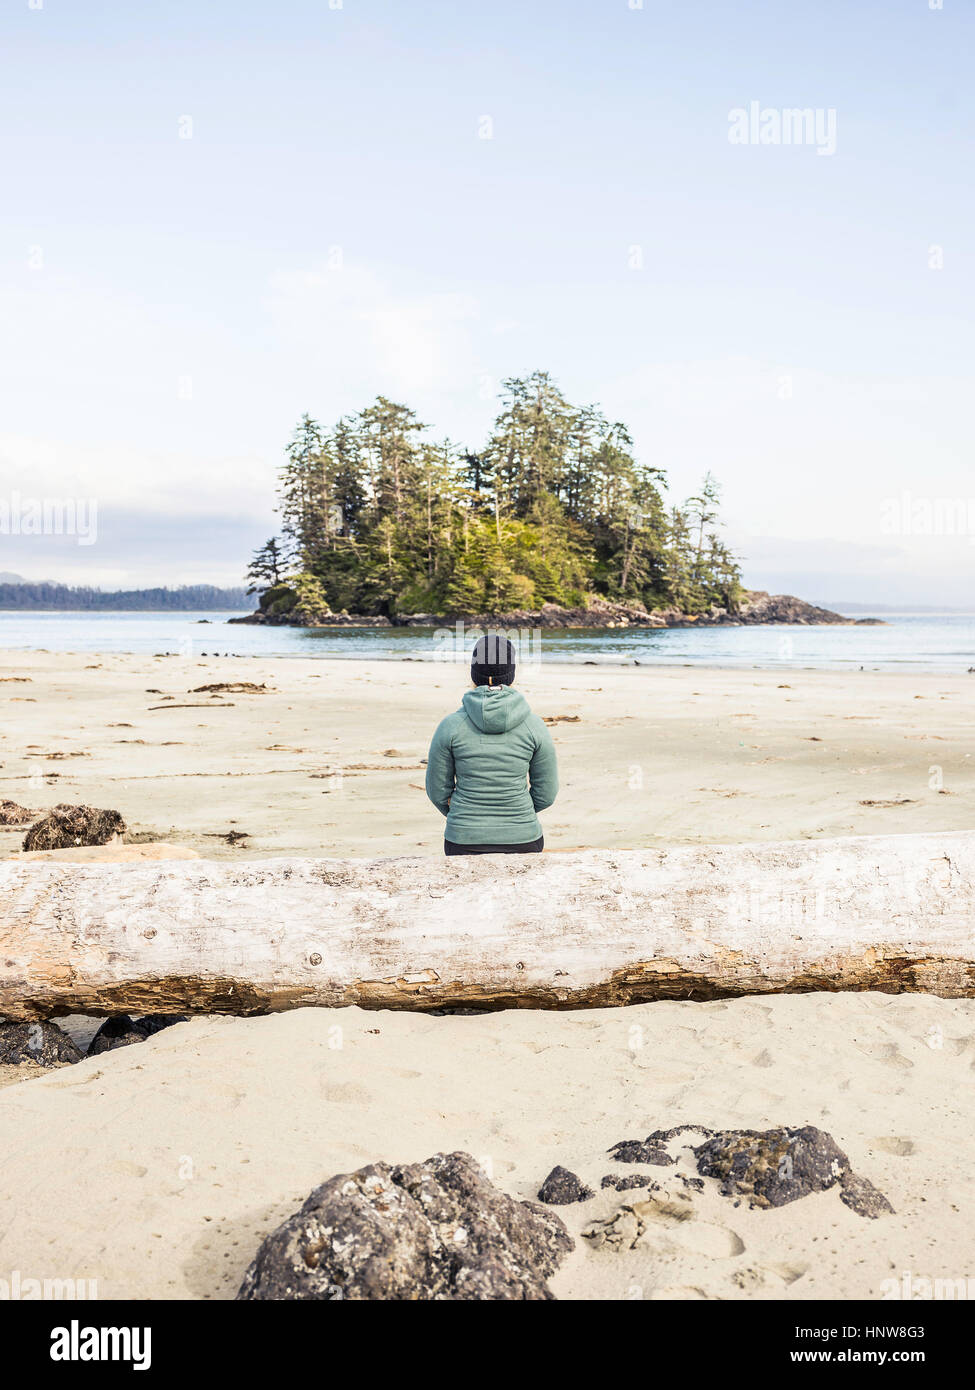 Woman looking out at island from Long Beach, Pacific Rim National Park, Vancouver Island, British Columbia, Canada Stock Photo